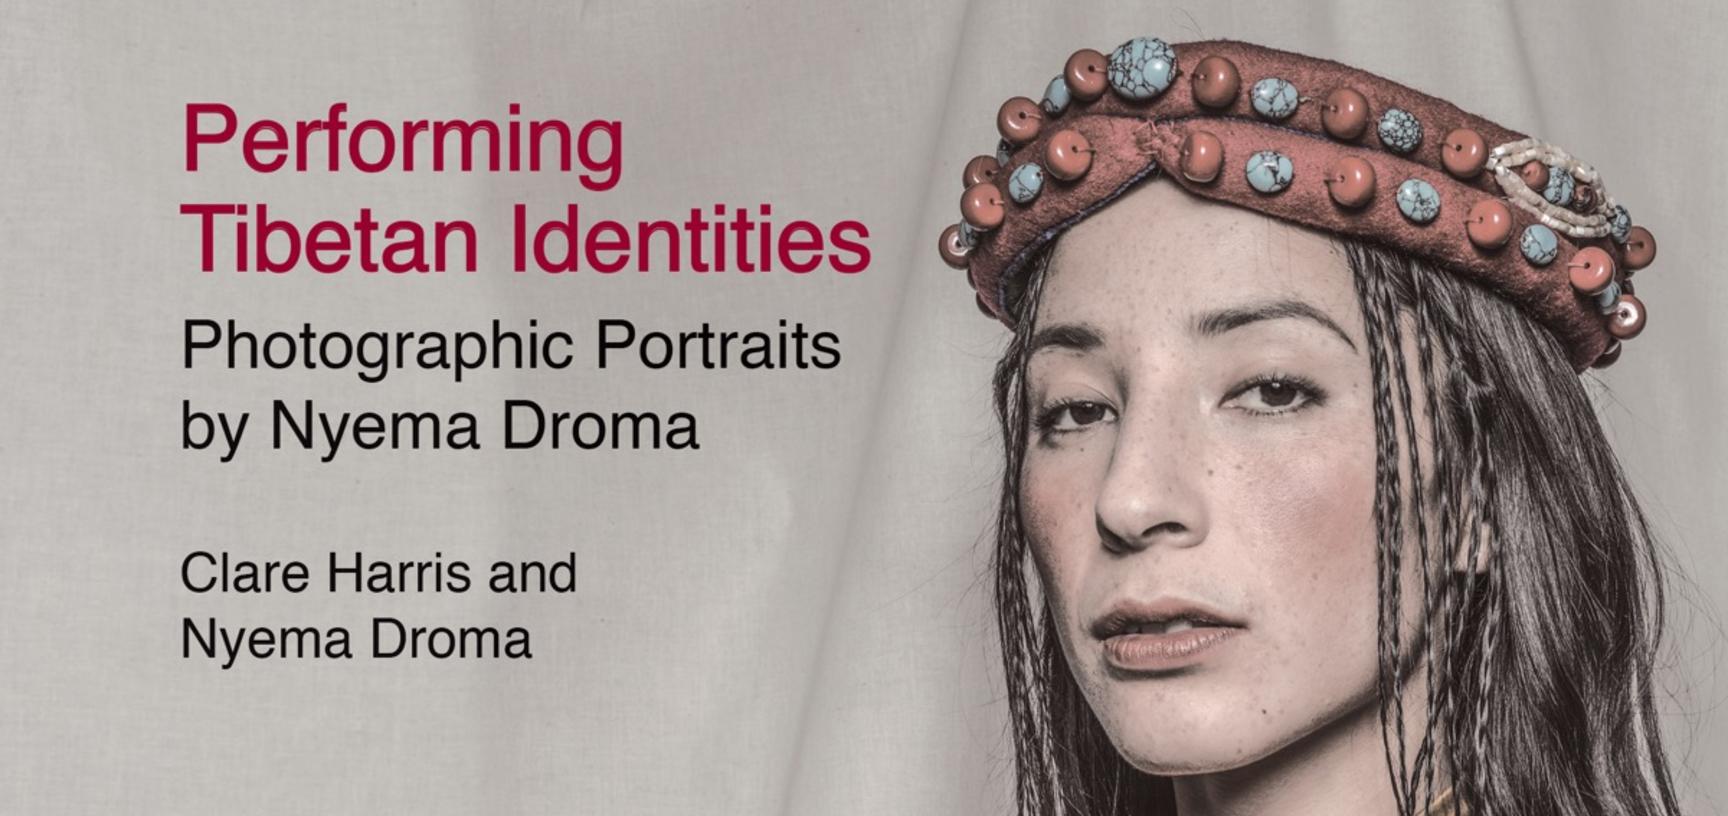 Clare Harris and Nyema Droma, Performing Tibetan Identities: Photographic Portraits by Nyema Droma, Oxford: Pitt Rivers Museum, 2019. Book cover